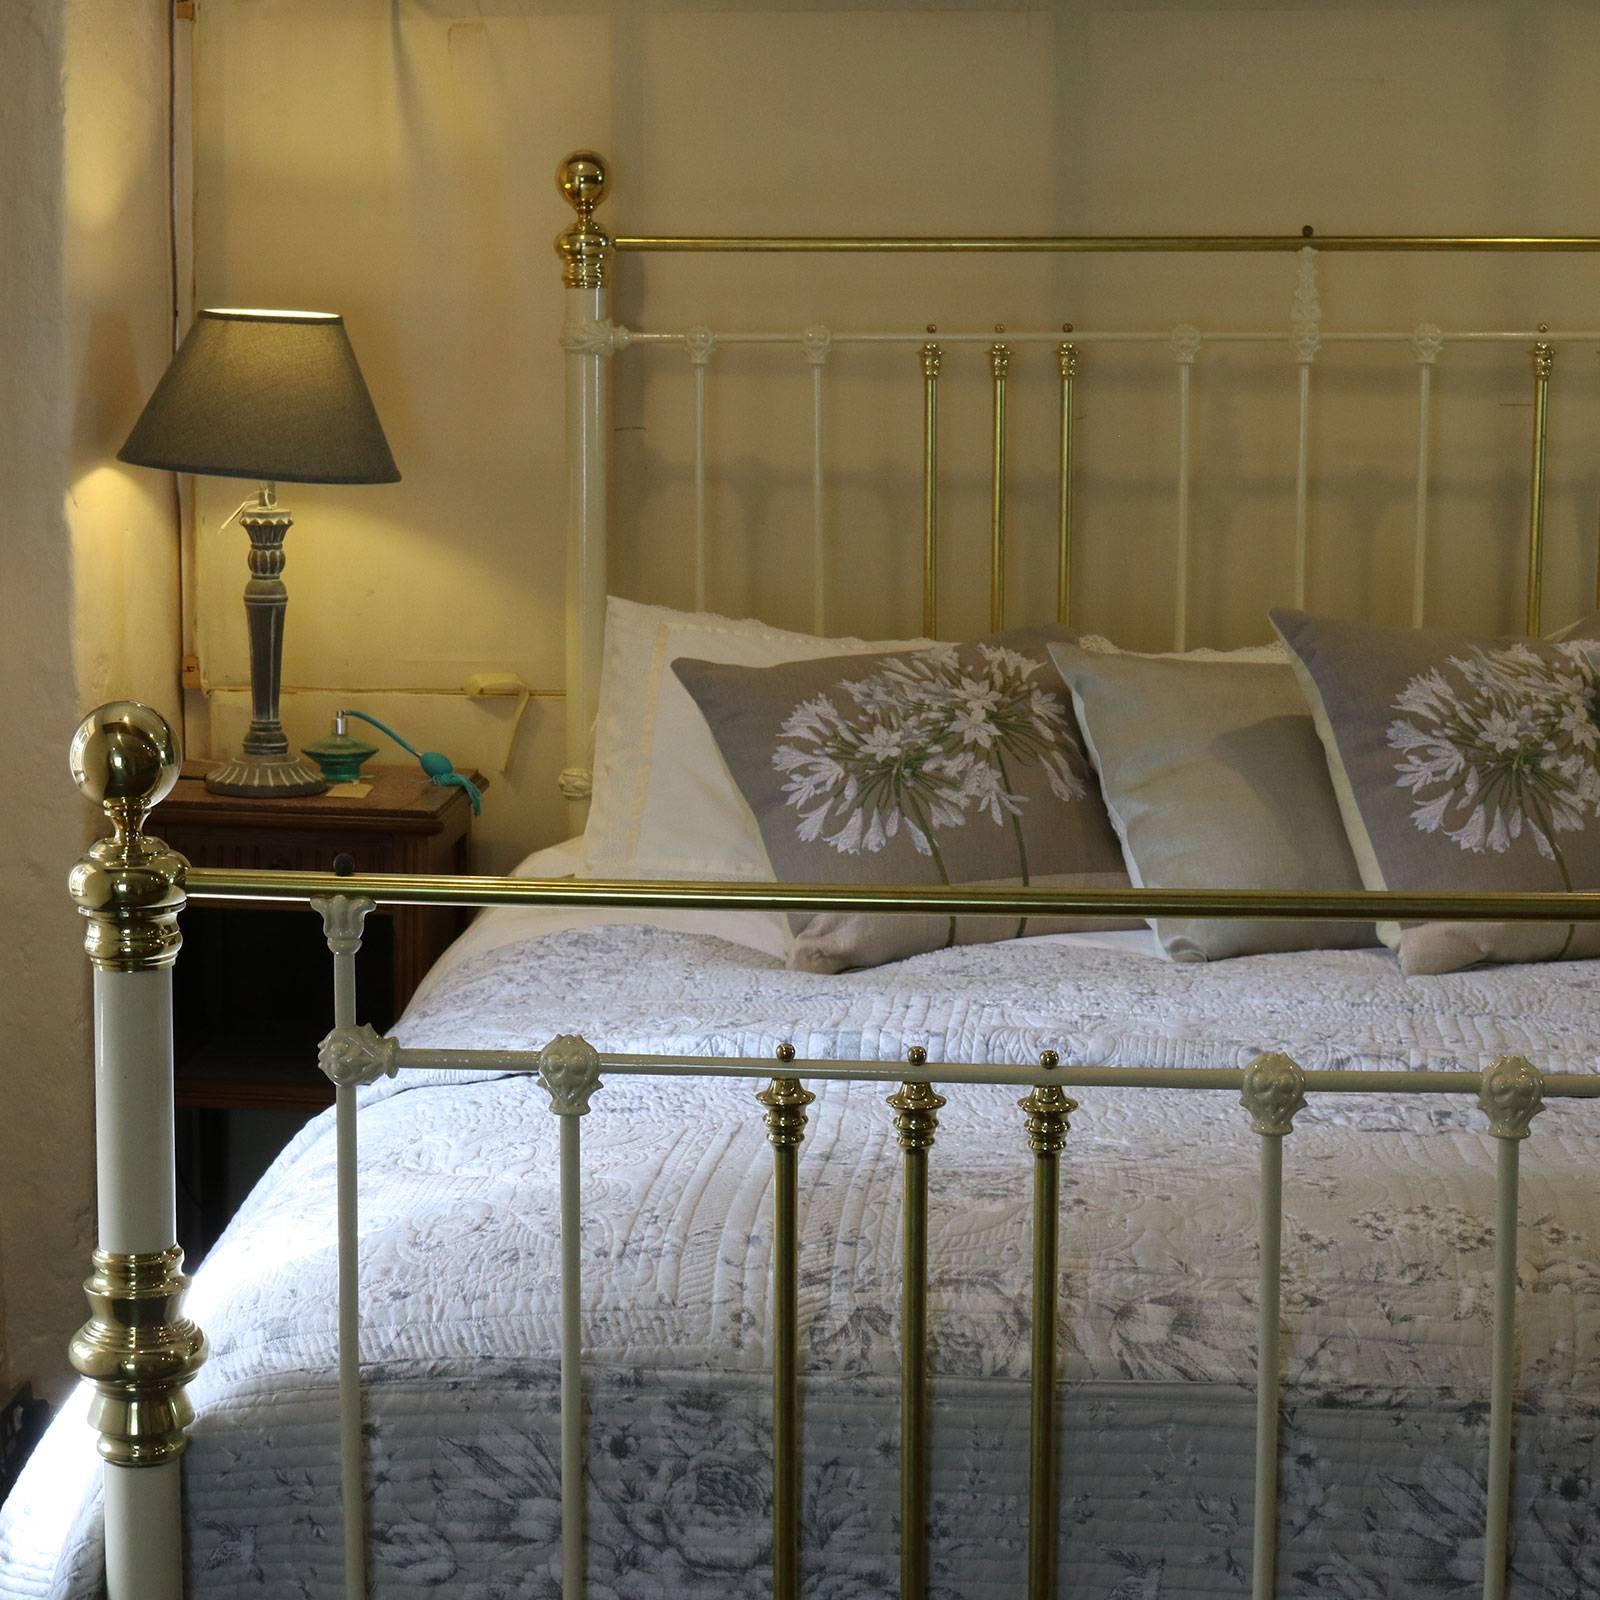 This magnificent brass and iron bed has been adapted from an original Victorian bed frame, circa 1890. 

This bed accepts a British King Size or Californian King base and mattress at 72 inches wide, or 6ft (180cm).

The price is for the bed